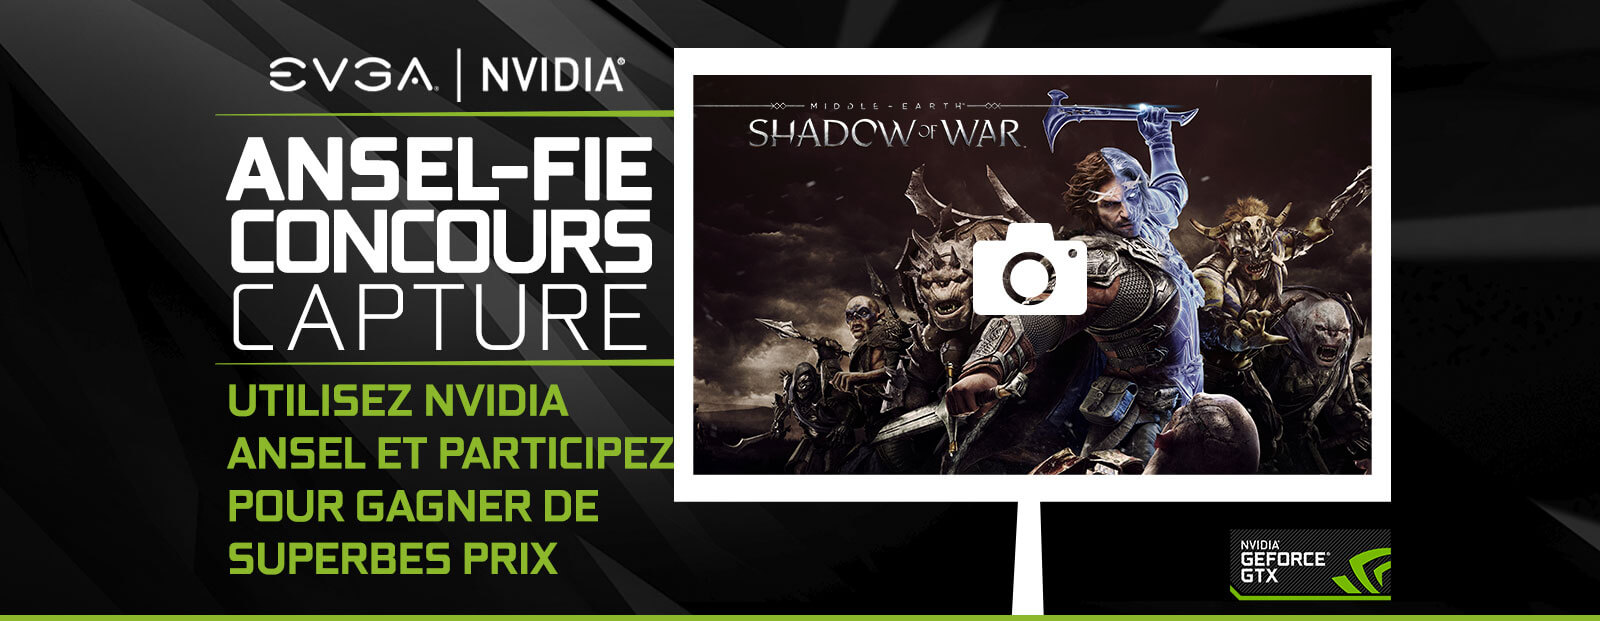 EVGA and NVIDIA® ANSEL-FIE Concours Capture